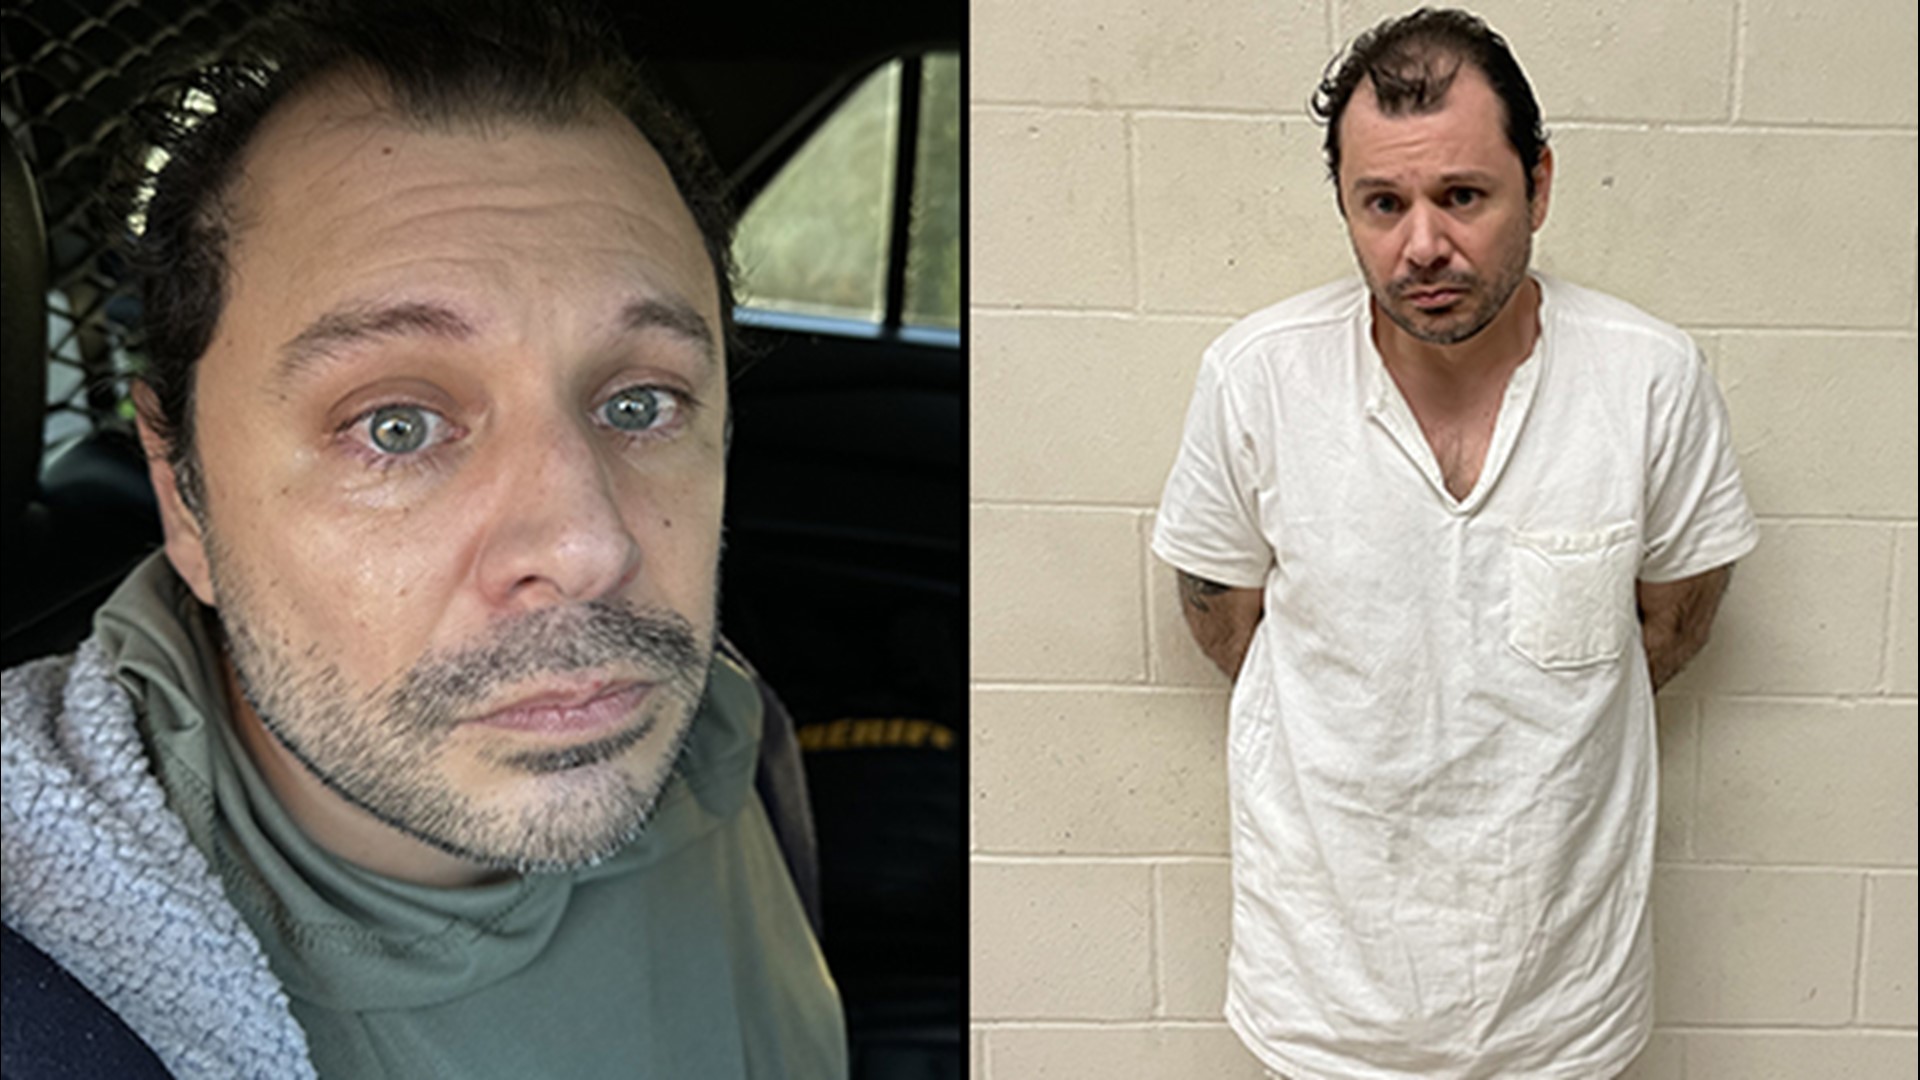 An inmate who escaped Brazoria County prison Sunday got out with help from his mother, a former correctional officer, the Texas Department of Criminal Justice said.